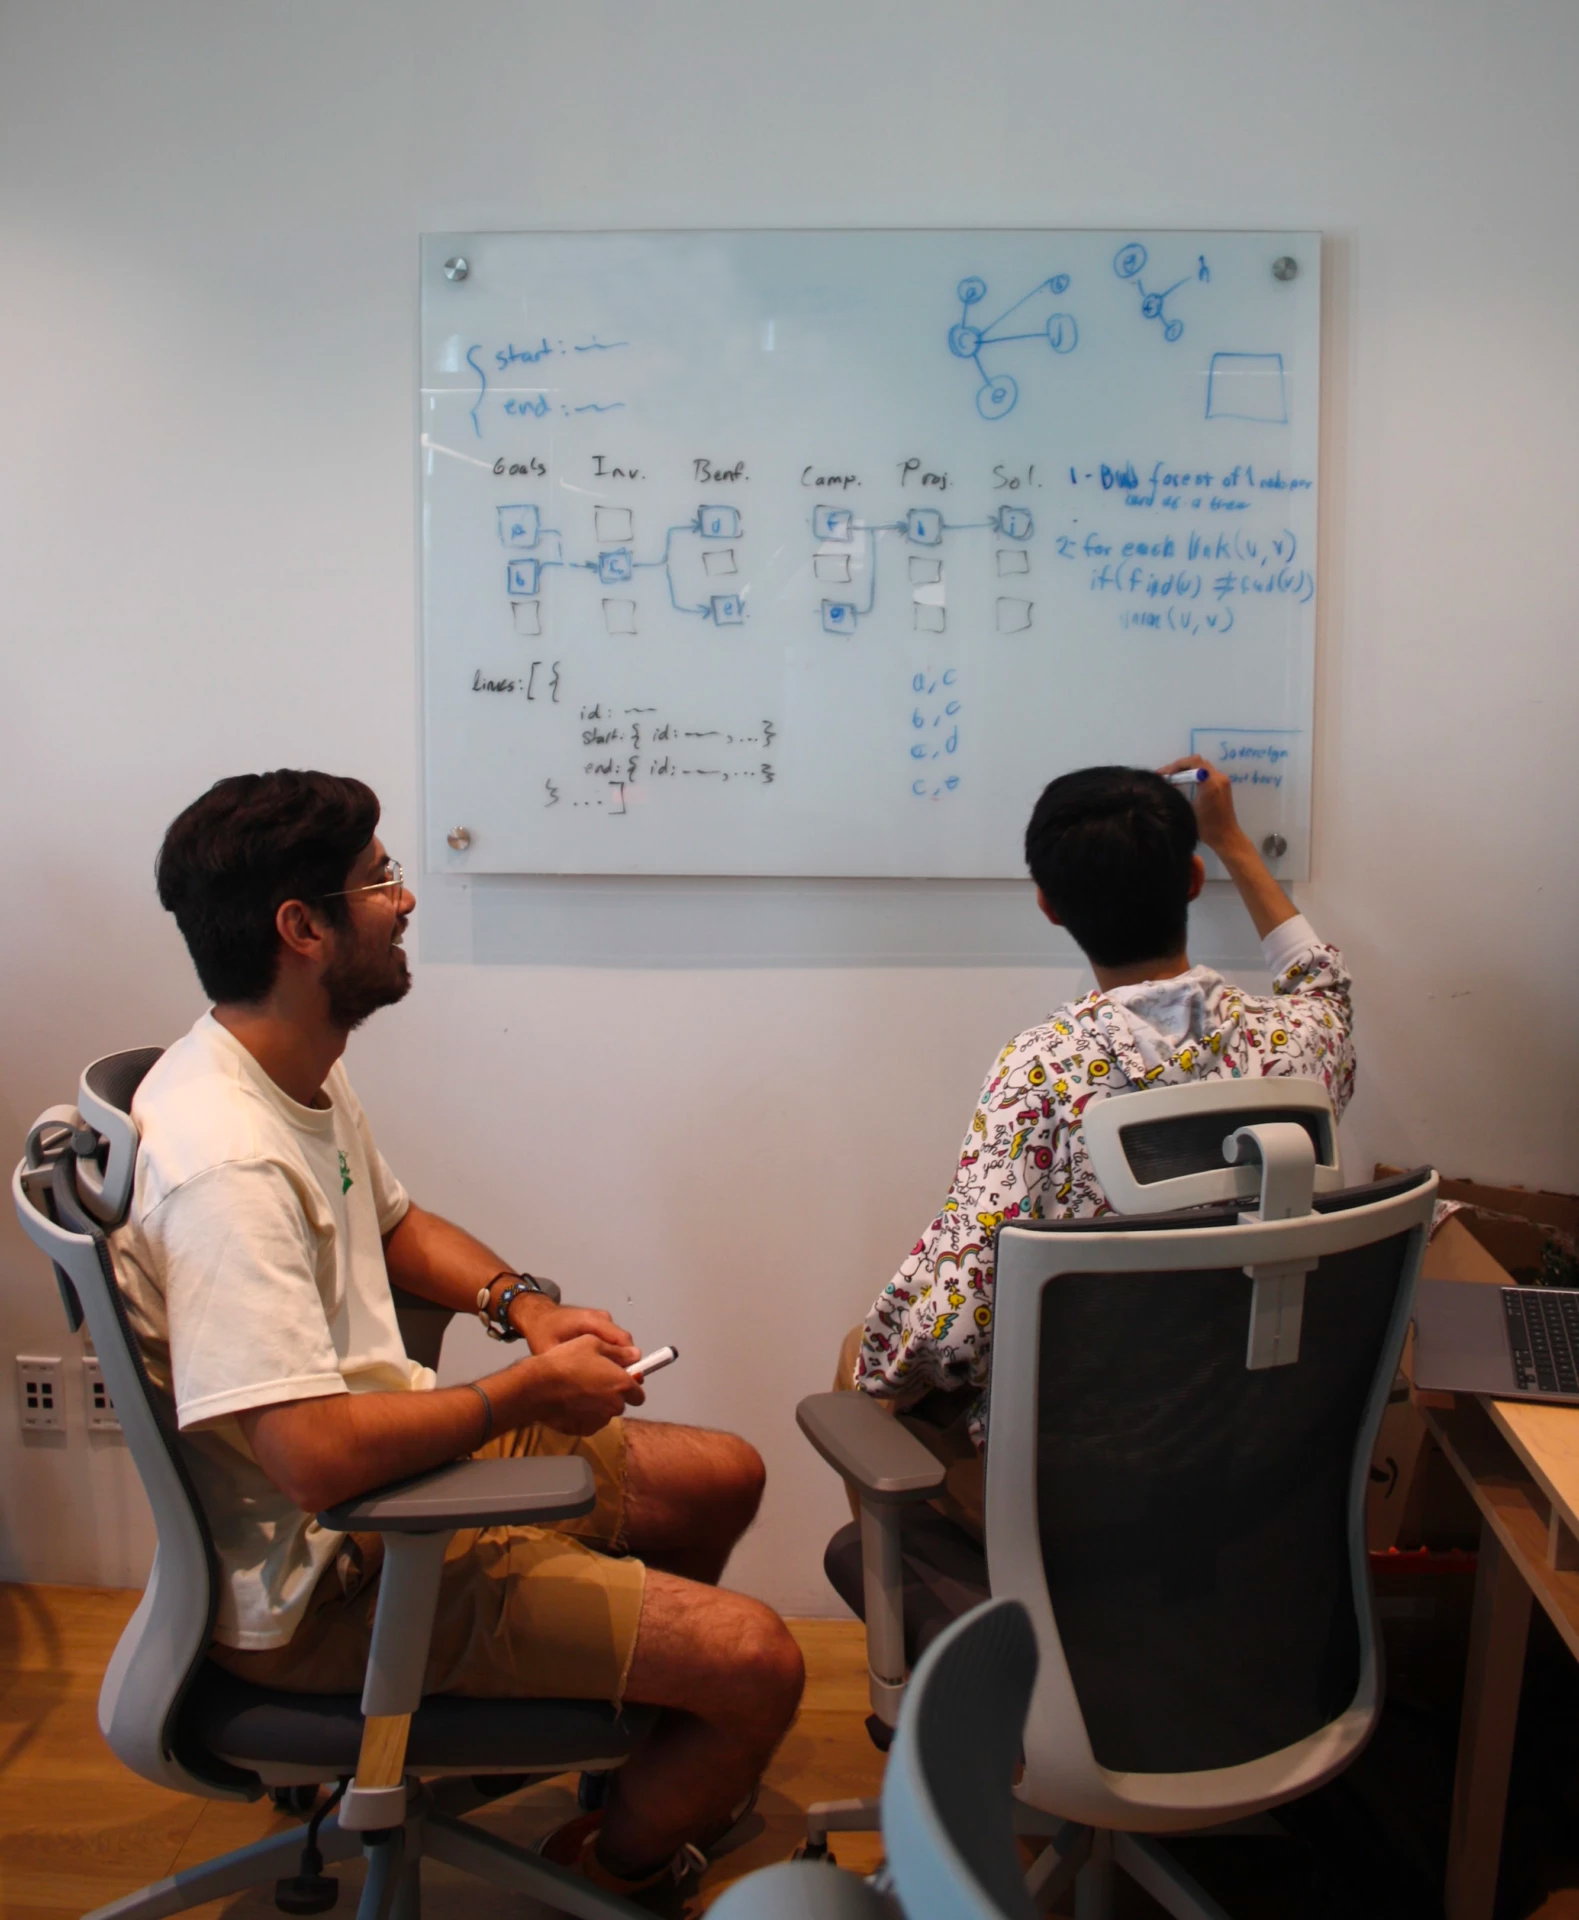 Cesar and Eric are solving technical problems on a whiteboard